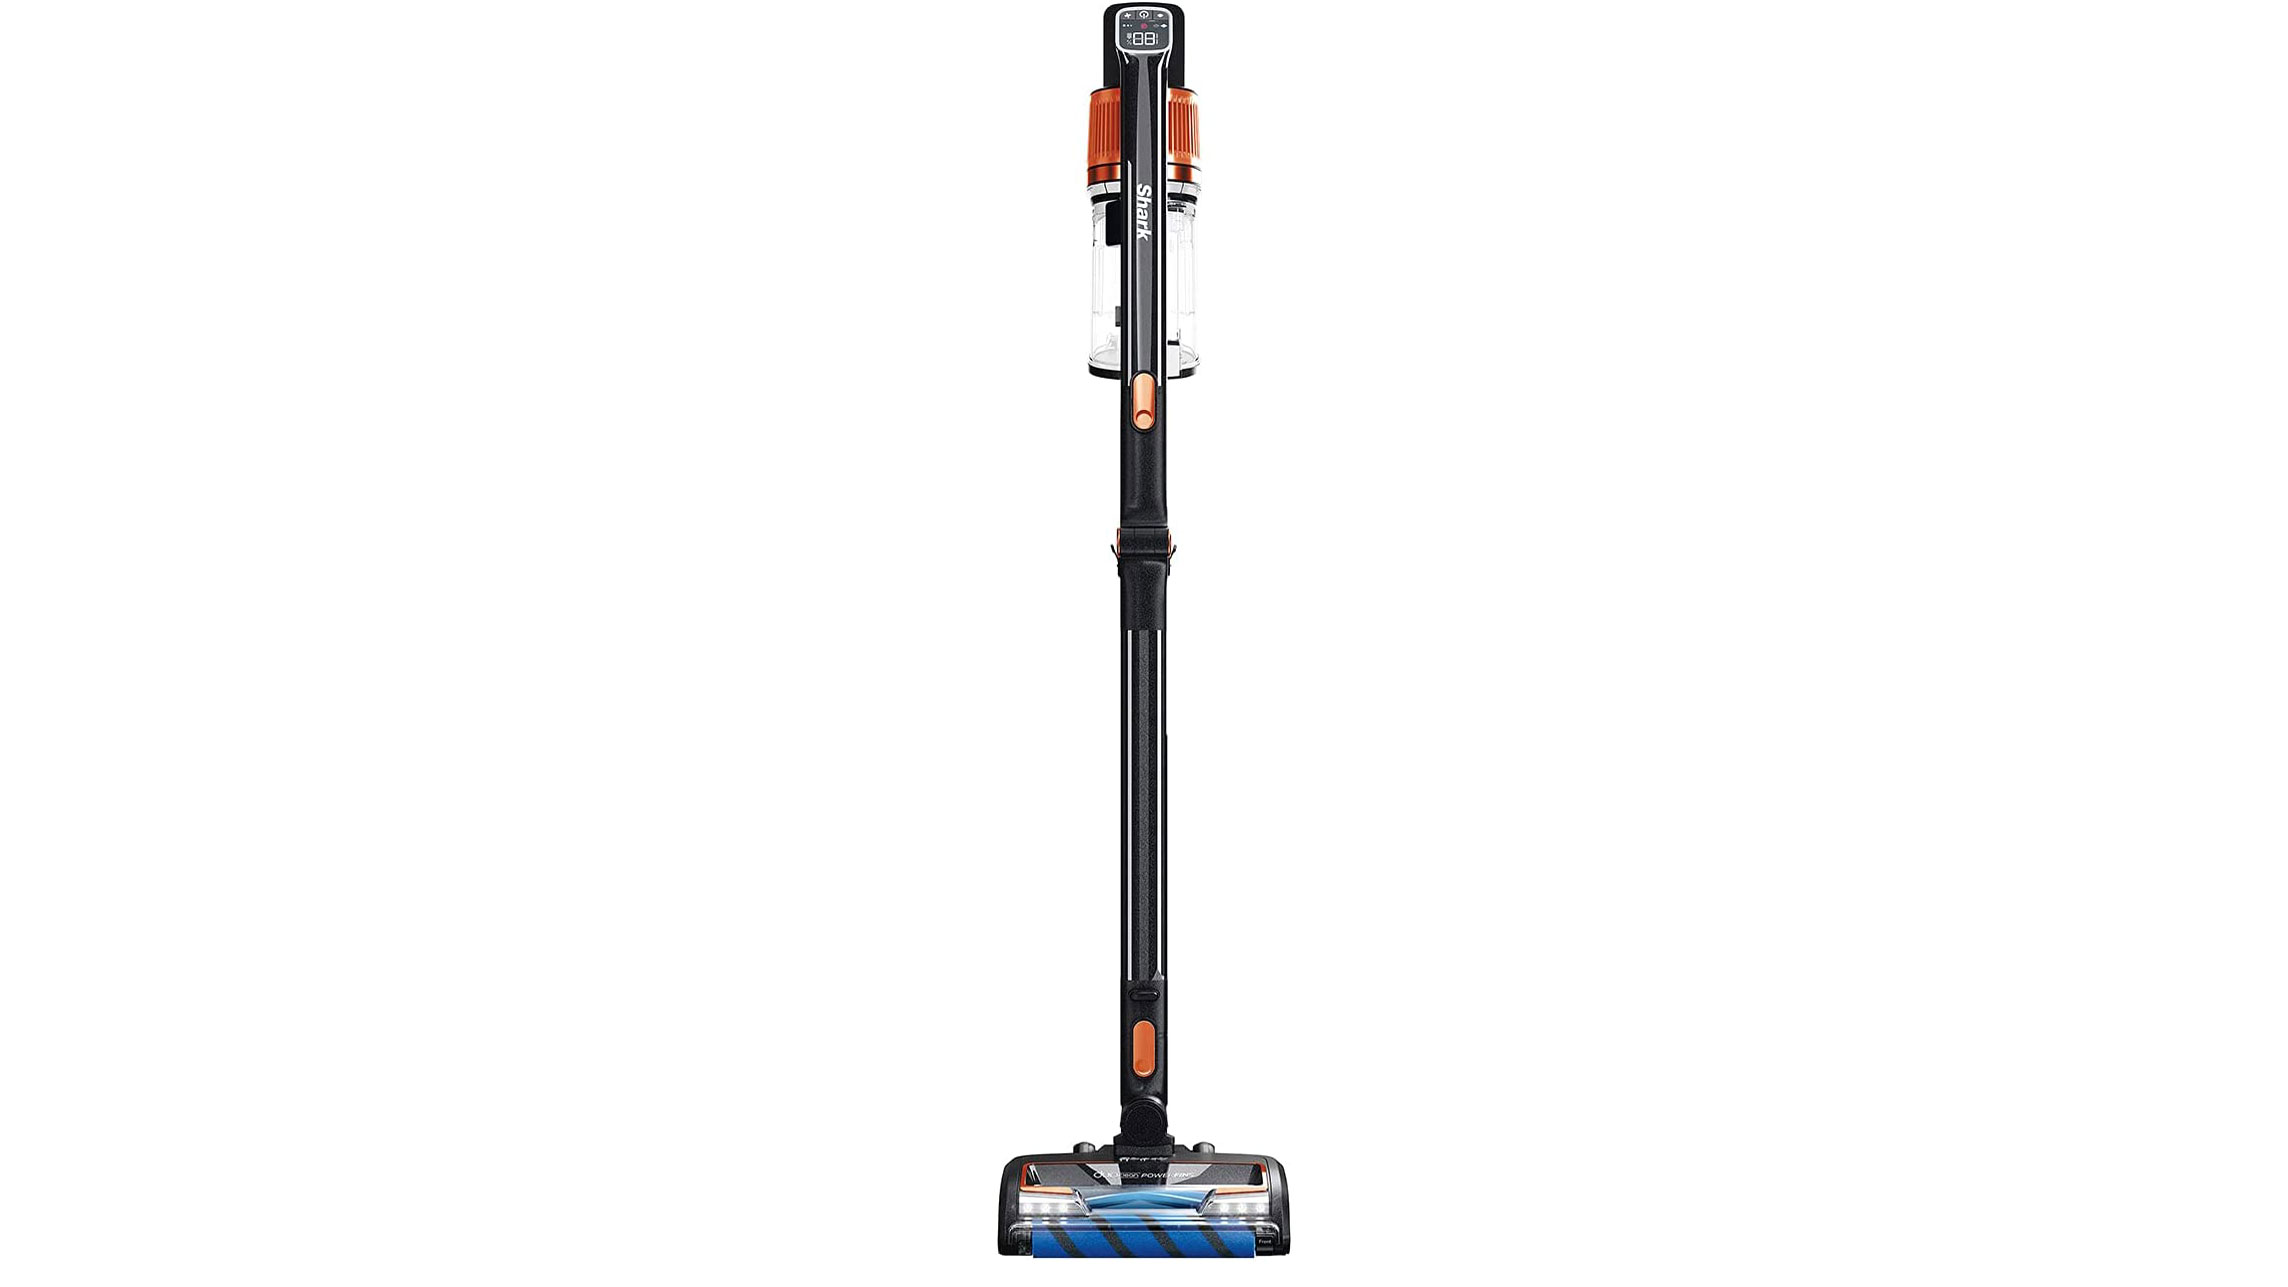 The Shark Anti Hair Wrap Cordless Stick Vacuum Cleaner with PowerFins & Flexology on a white background